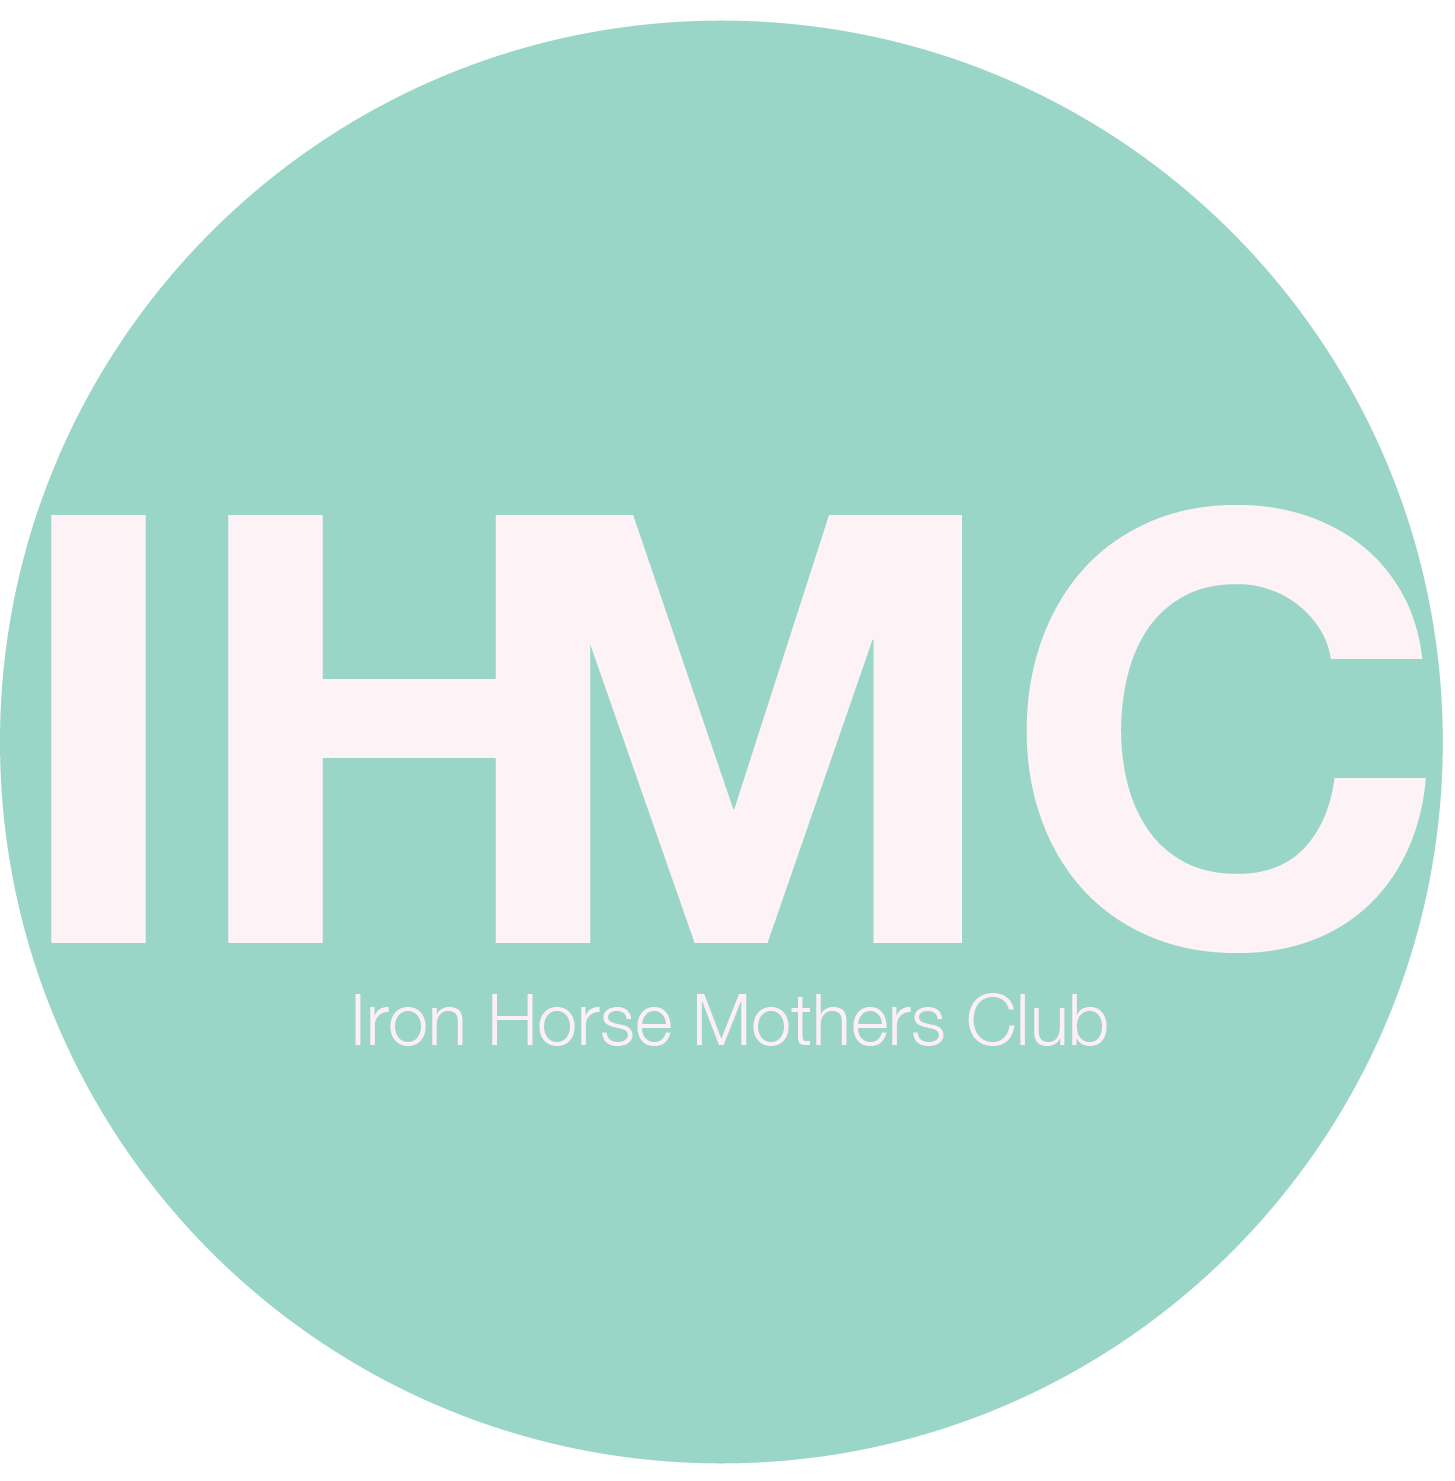 Iron Horse Mothers Club